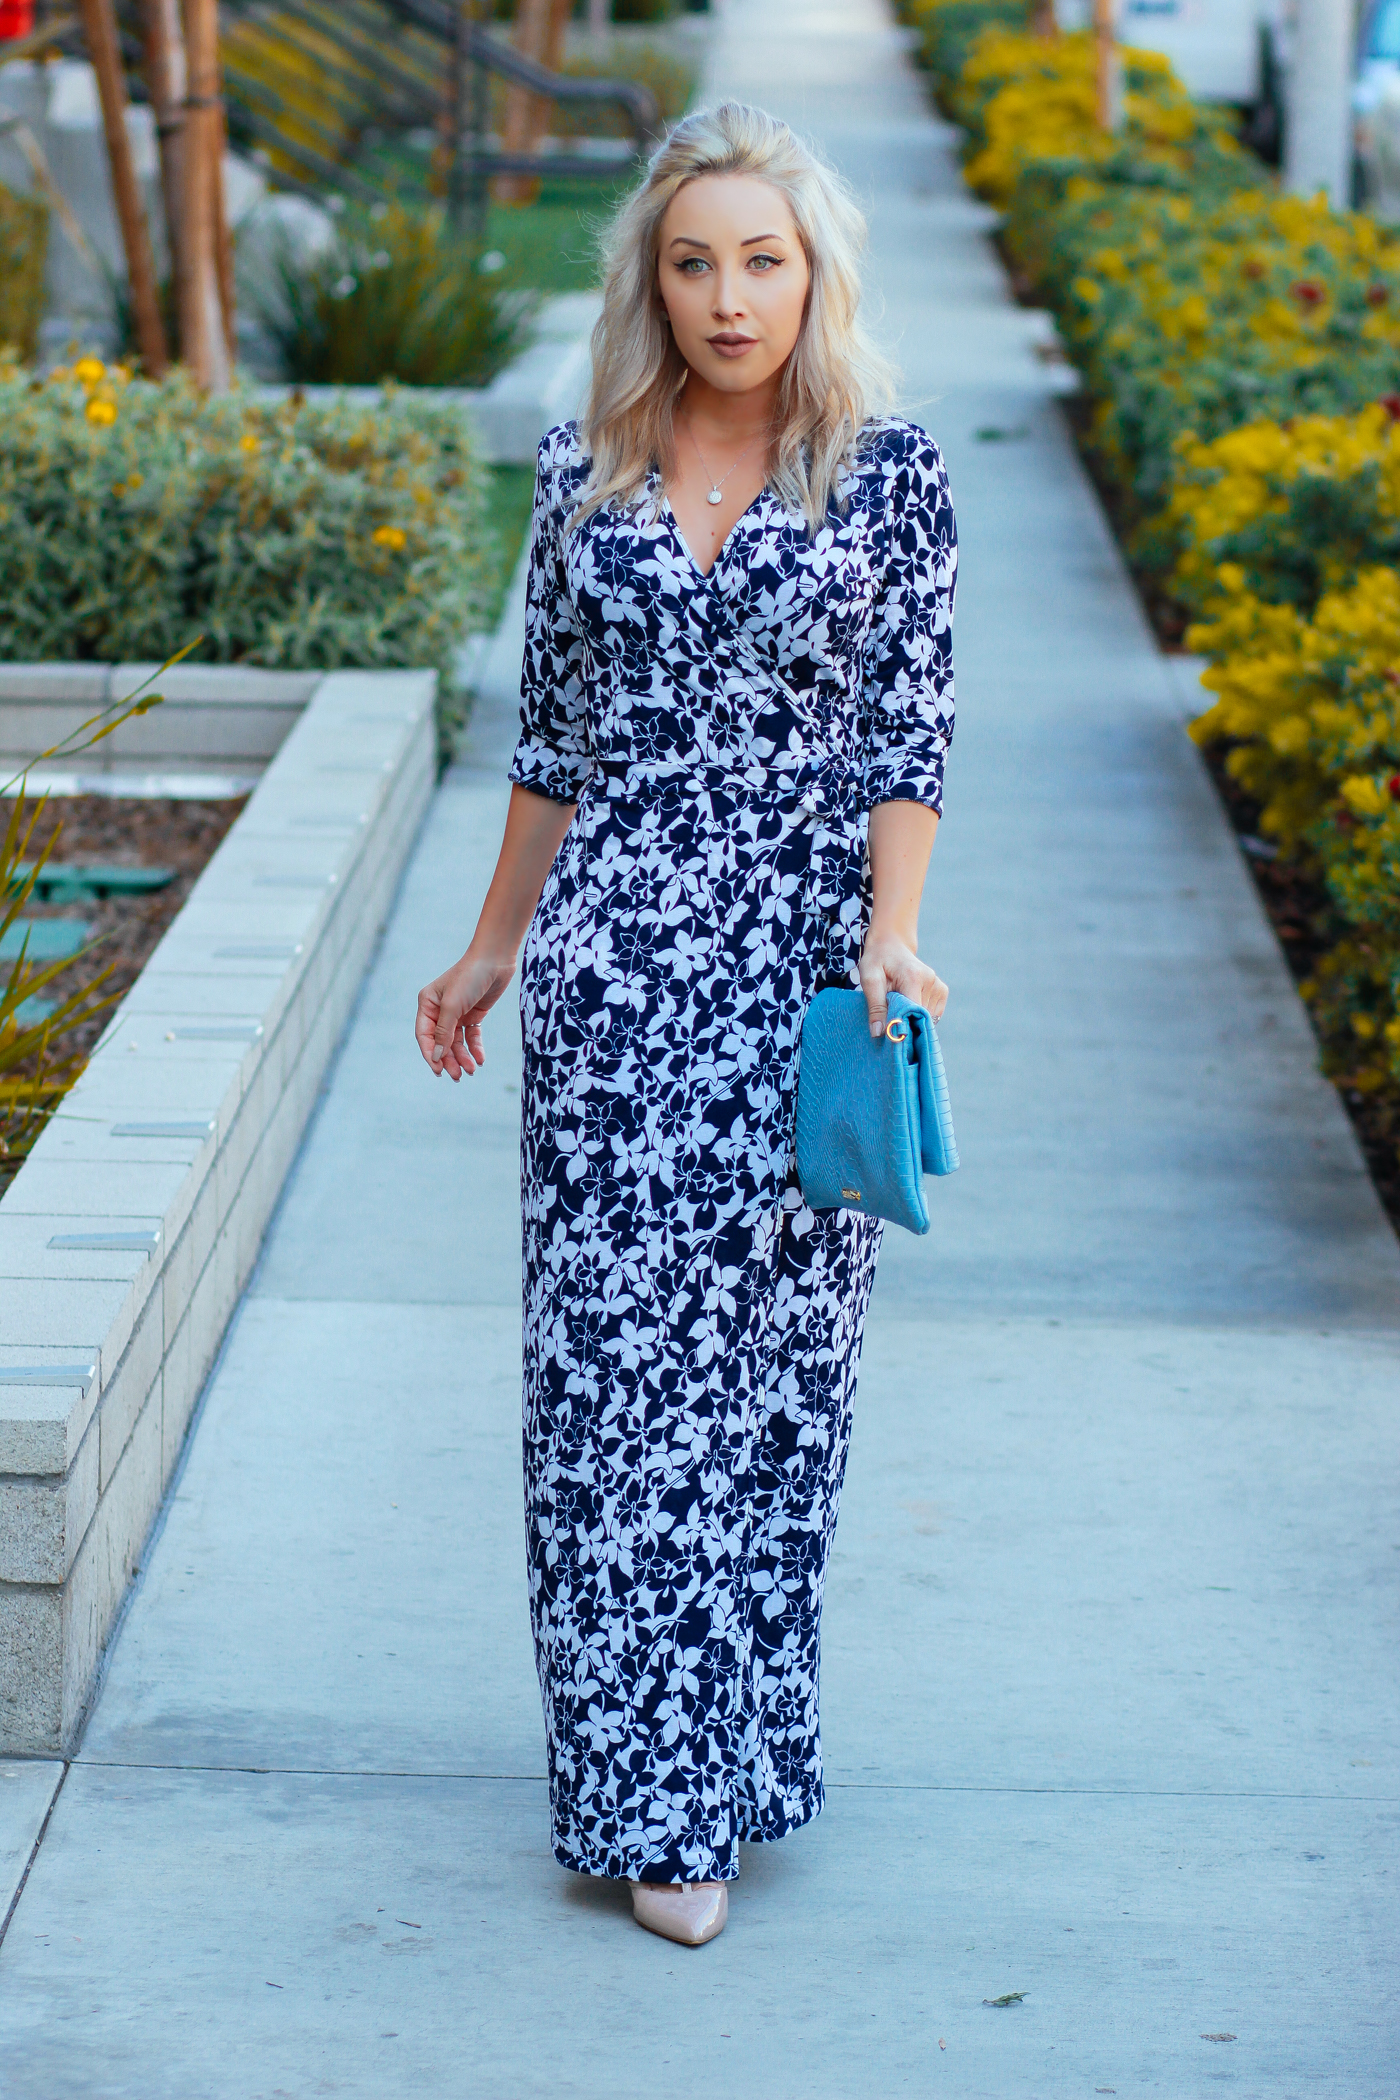 Blondie in the City | Blue and White Floral Wrap Dress